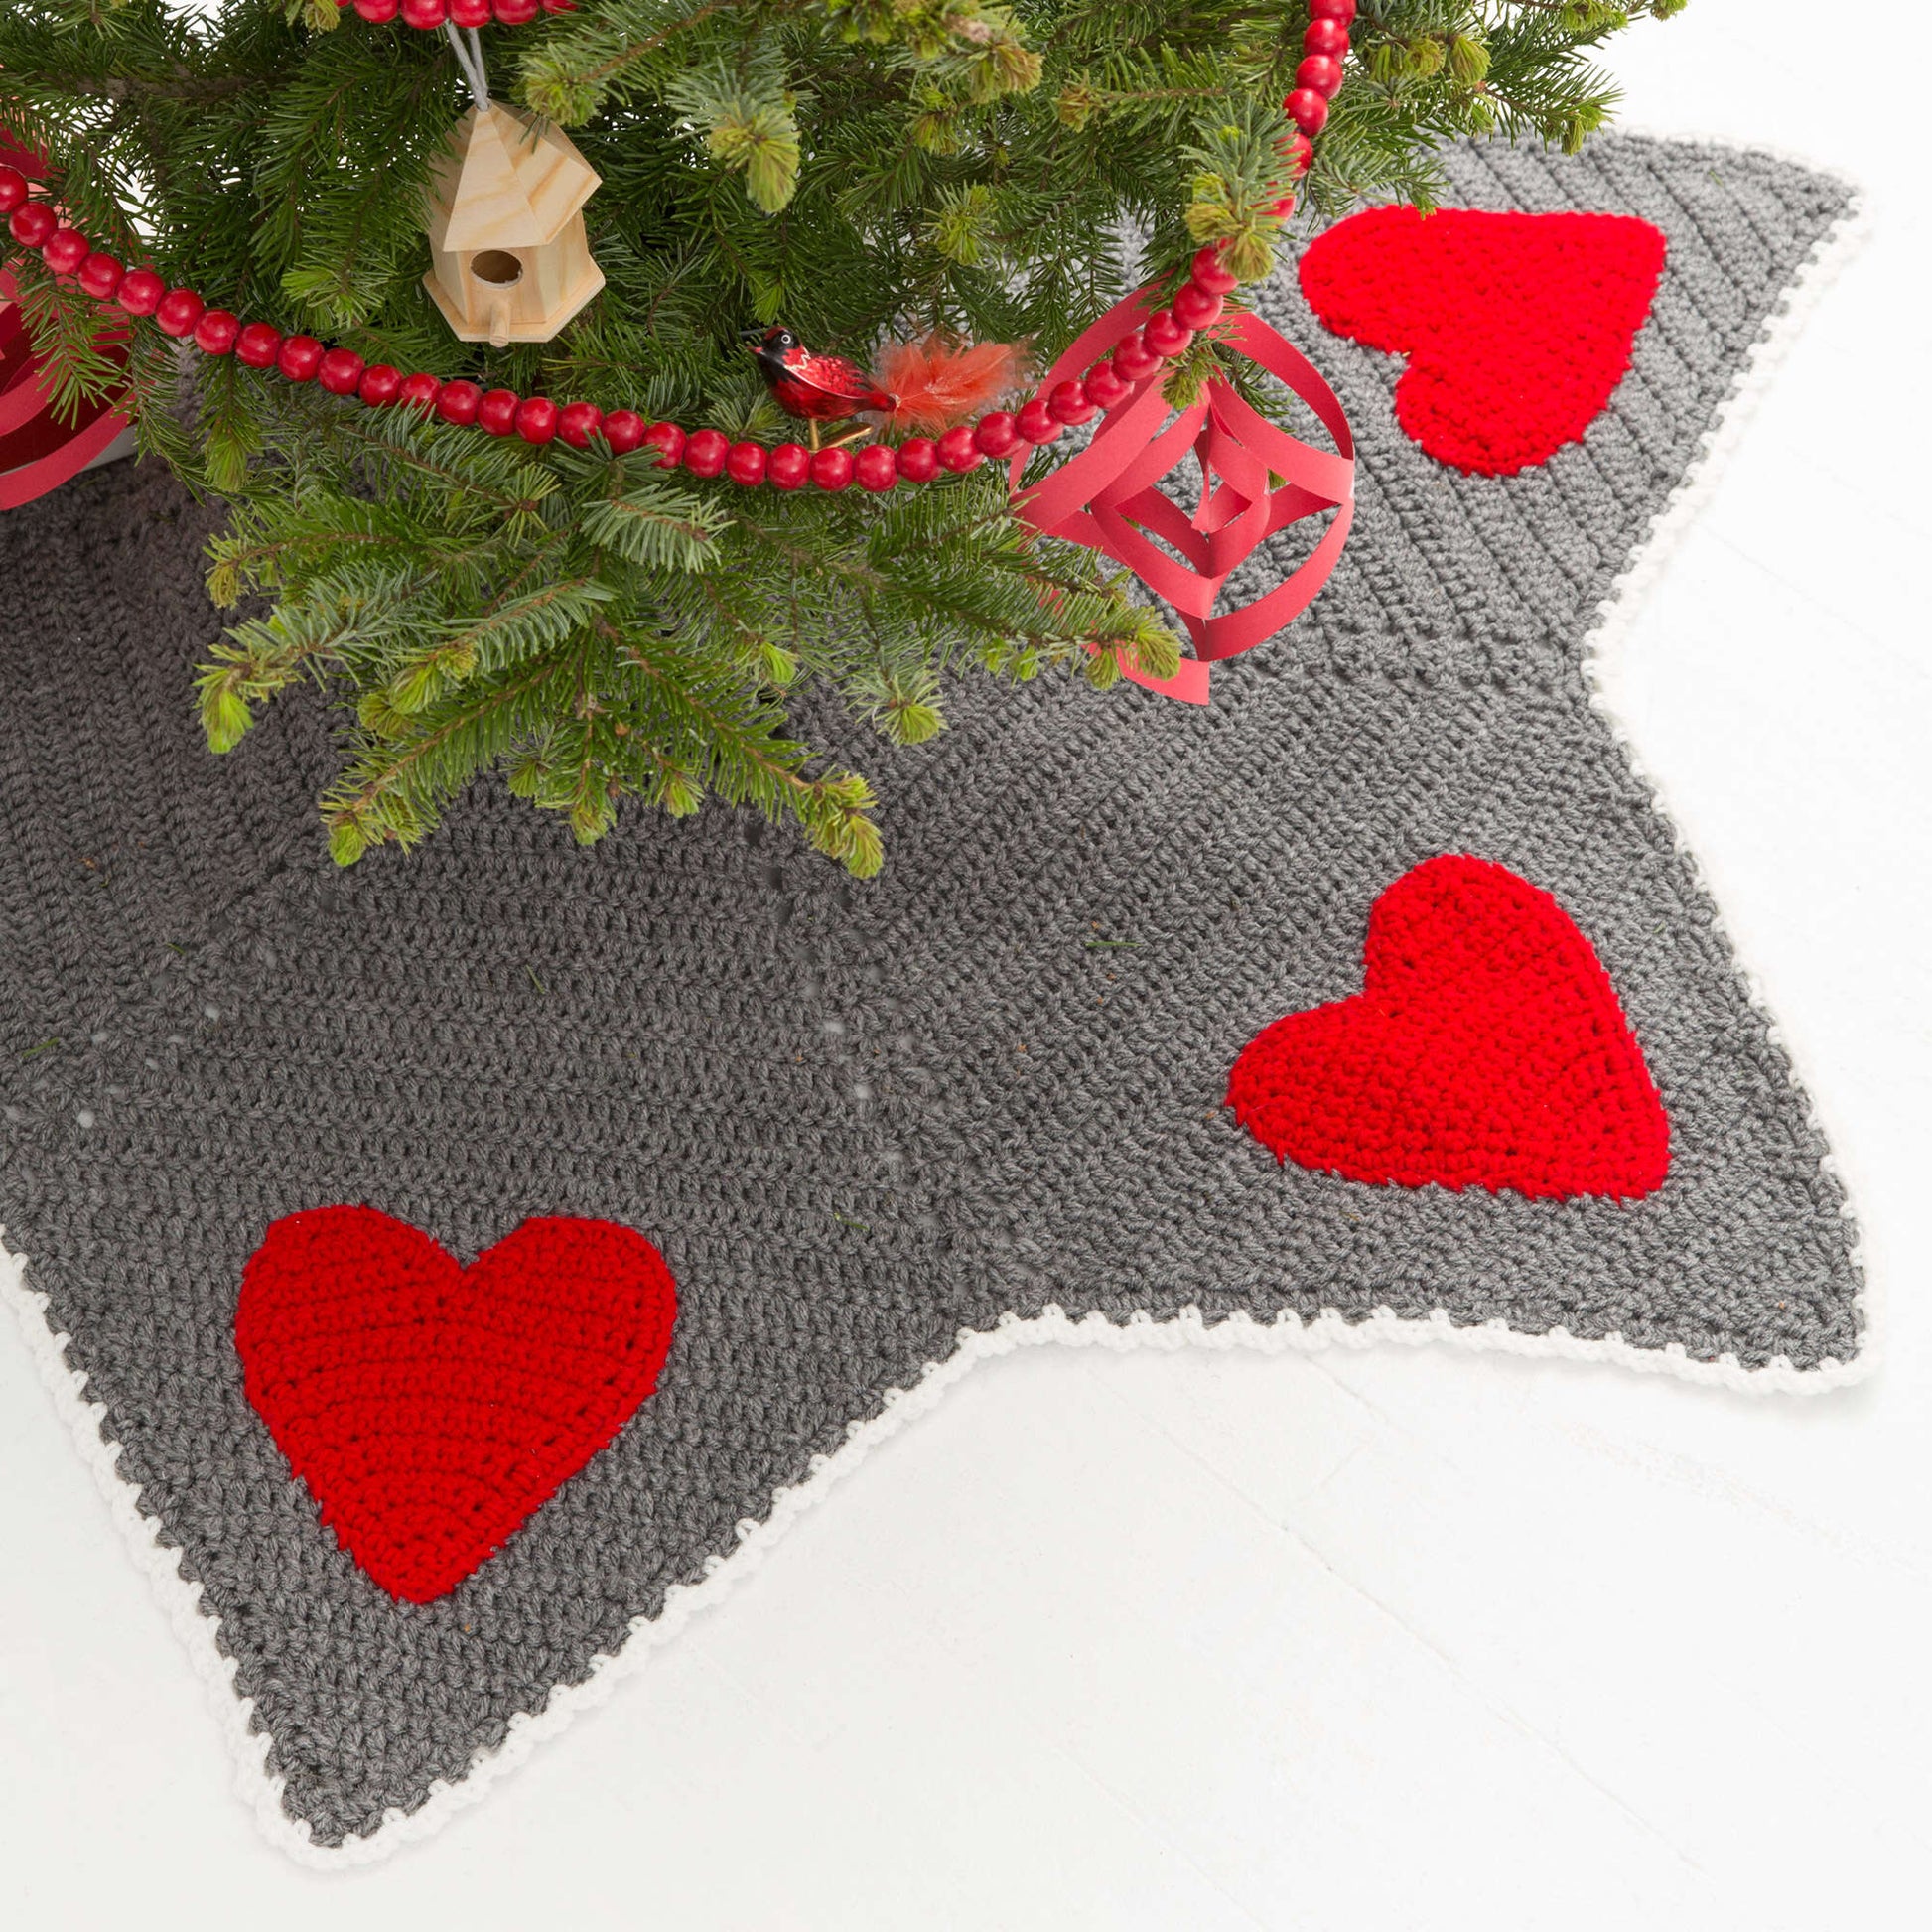 Red Heart Holiday Hearts Tree Skirt Red Heart Holiday Hearts Tree Skirt